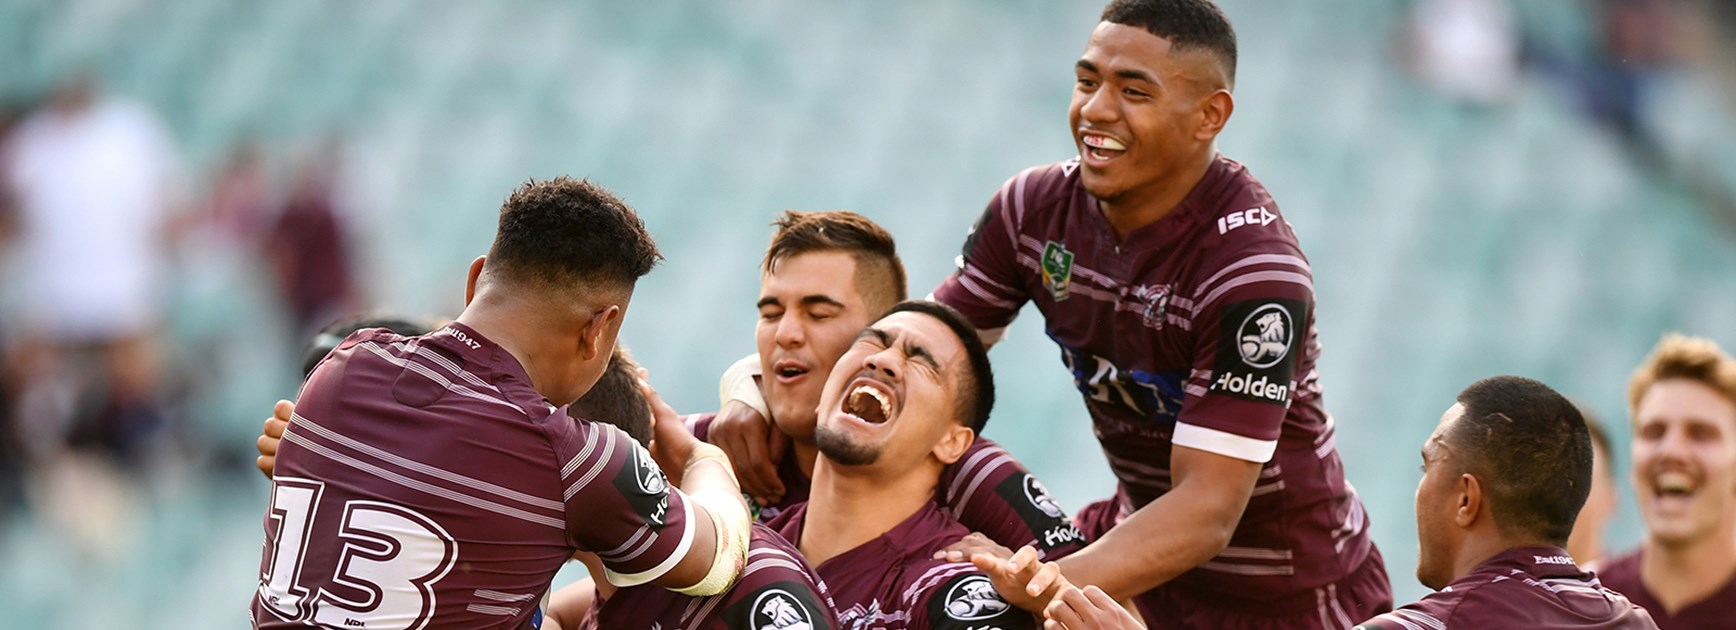 The Manly Sea Eagles NYC team upset the Dragons to qualify for the Holden Cup Grand Final.